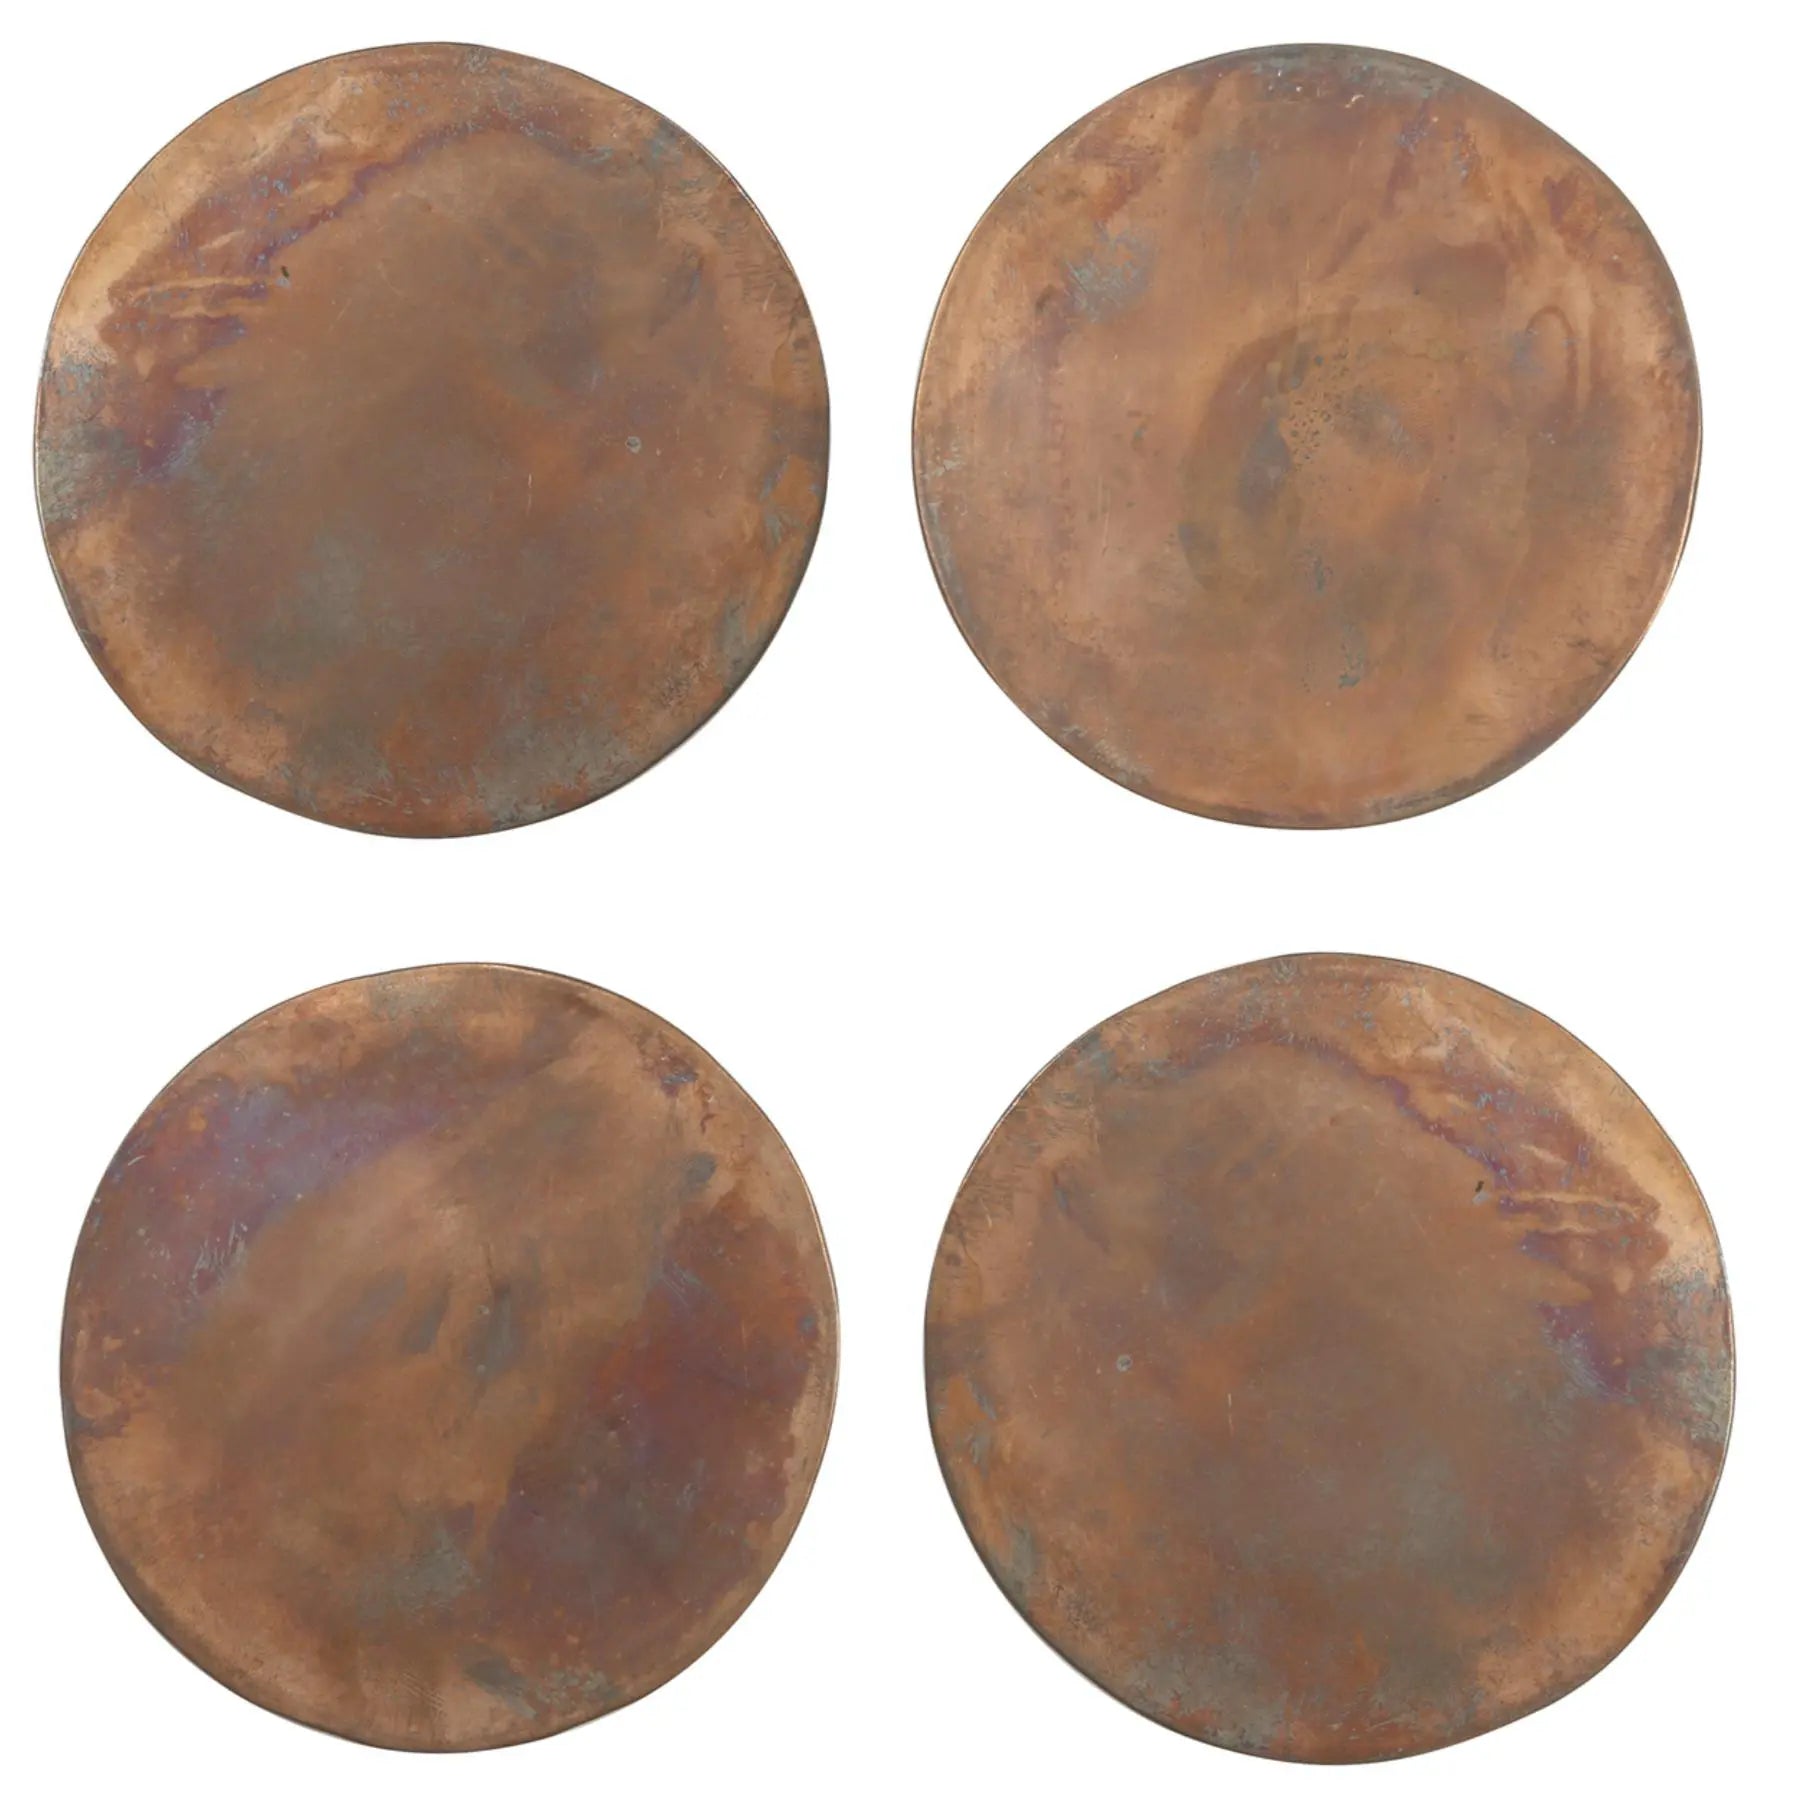 Shop Stunning Solid Brass, Copper, or Nickel Coasters - Perfect